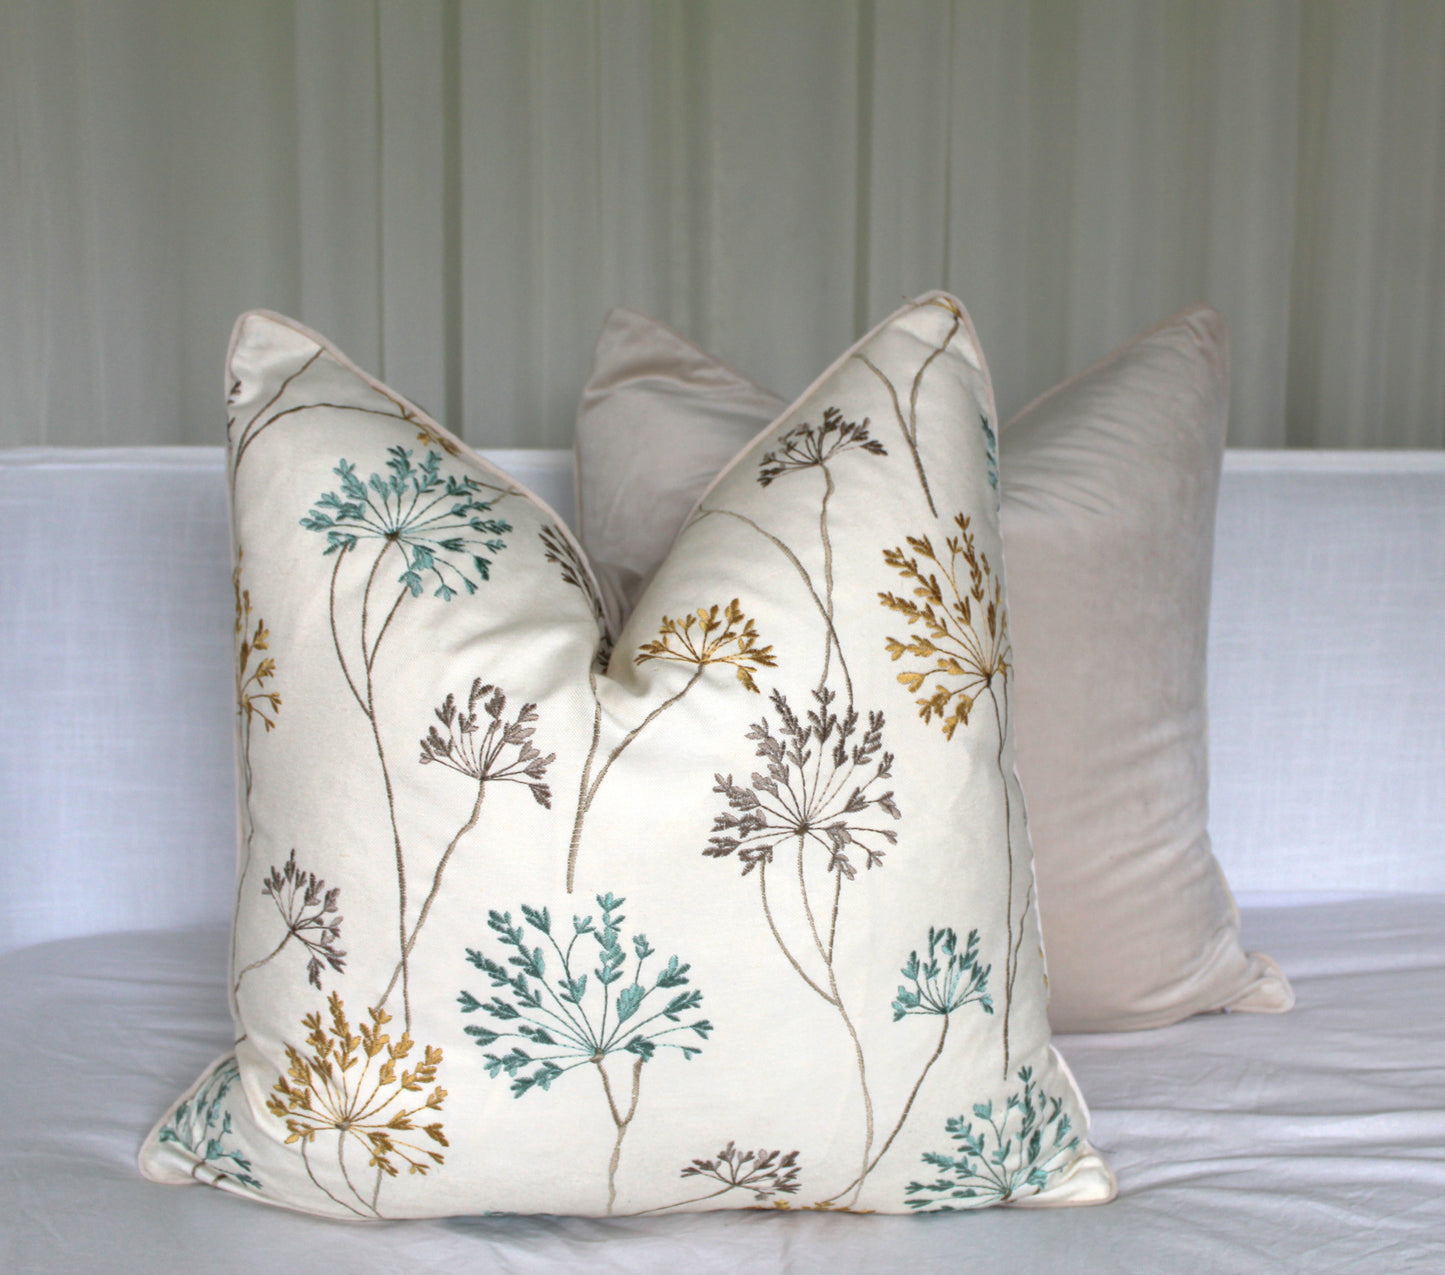 Embroidered Cushion covers. Made in Australia